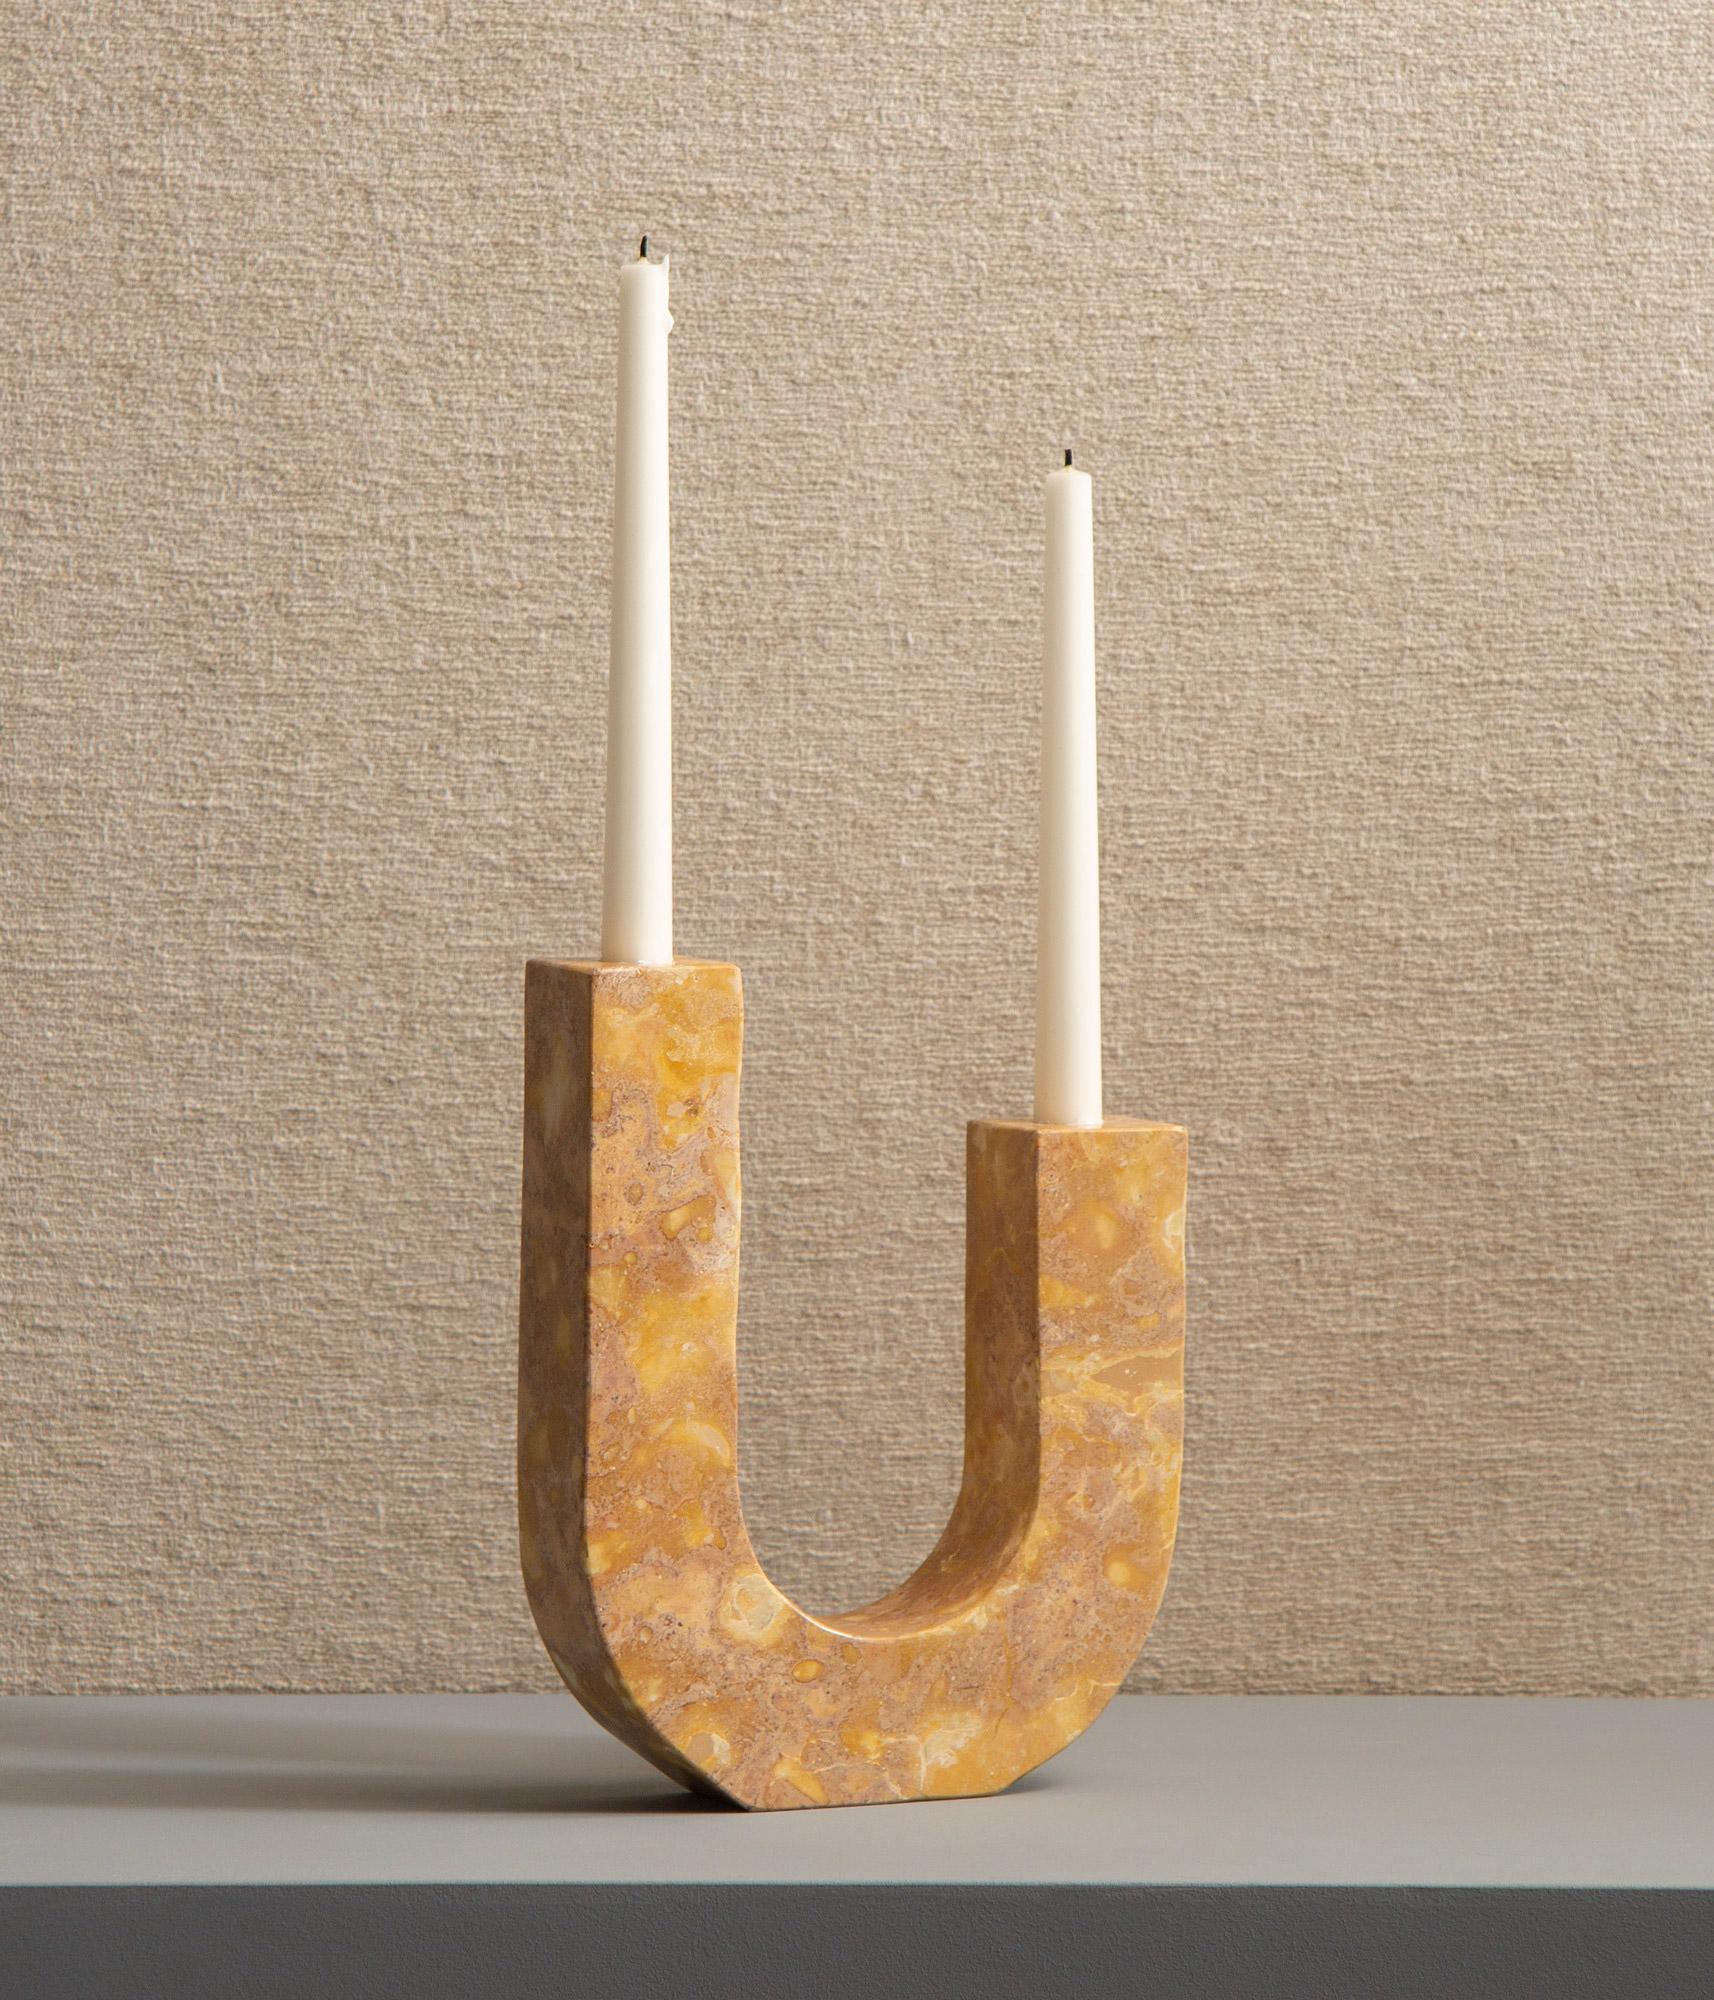 Arco candle holder gets its inspiration from grand arches from buildings and places we have visited, especially in our home town Palma there are so many incredible buildings with these shapes. The candleholder is made of marble which is a natural